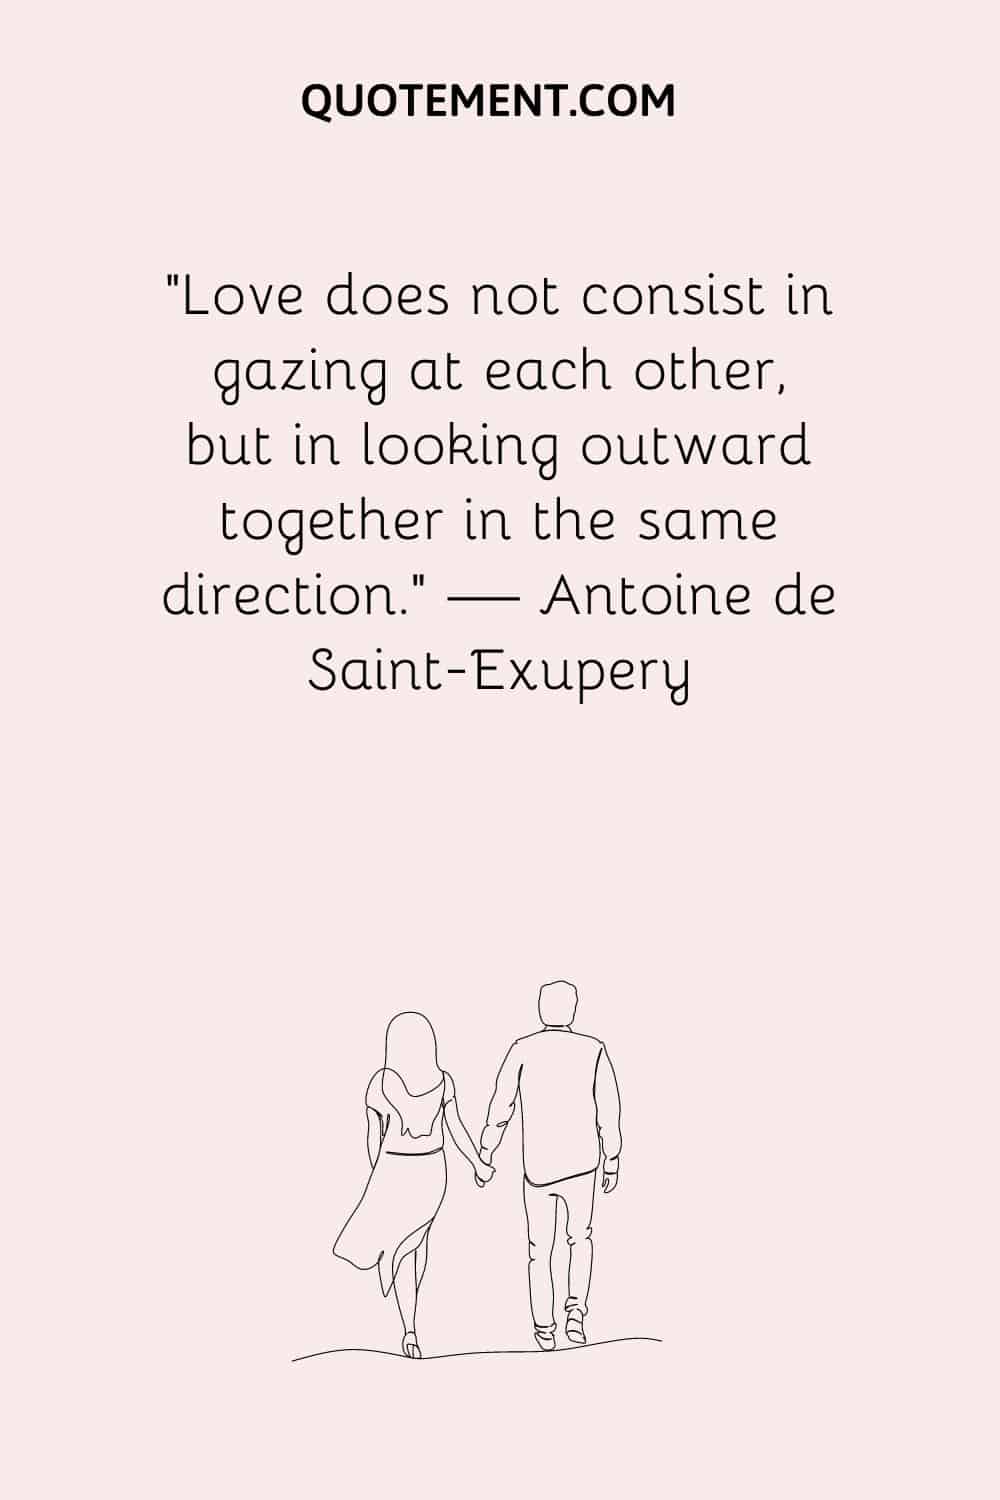 Love does not consist in gazing at each other, but in looking outward together in the same direction